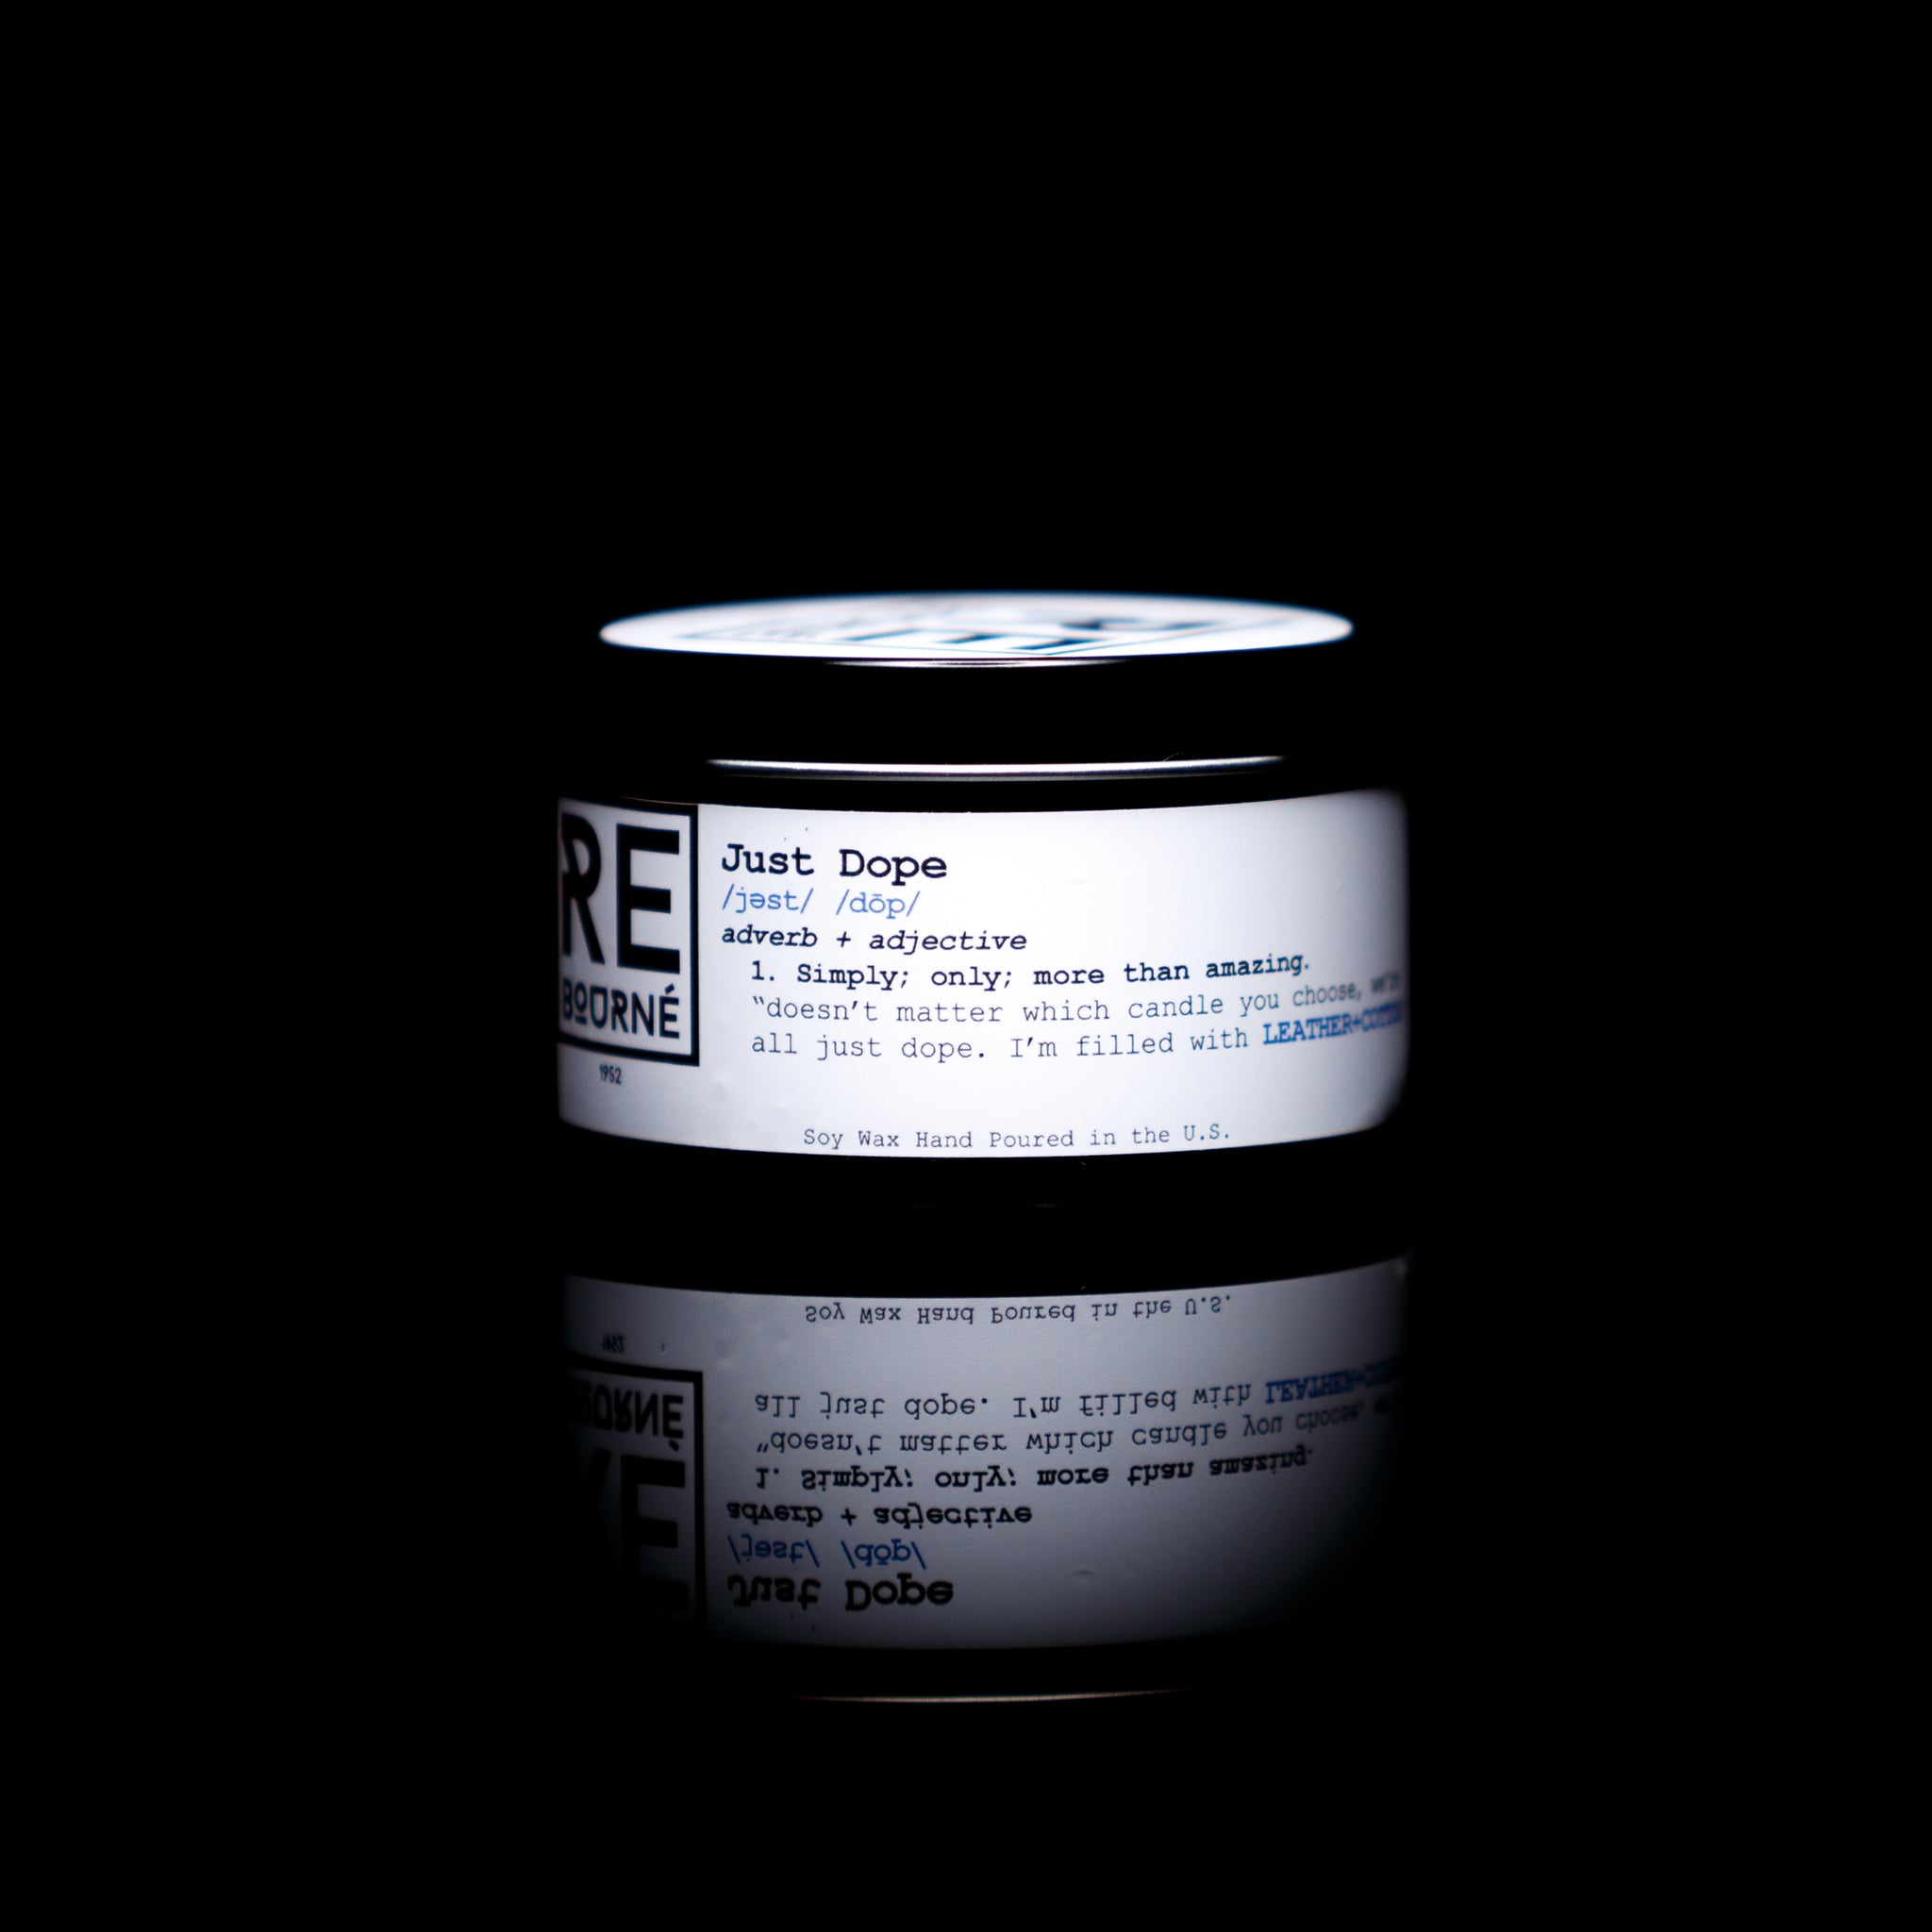 LEATHER + COTTON Scented Candle "Just Dope" - Rebourne Body + Home